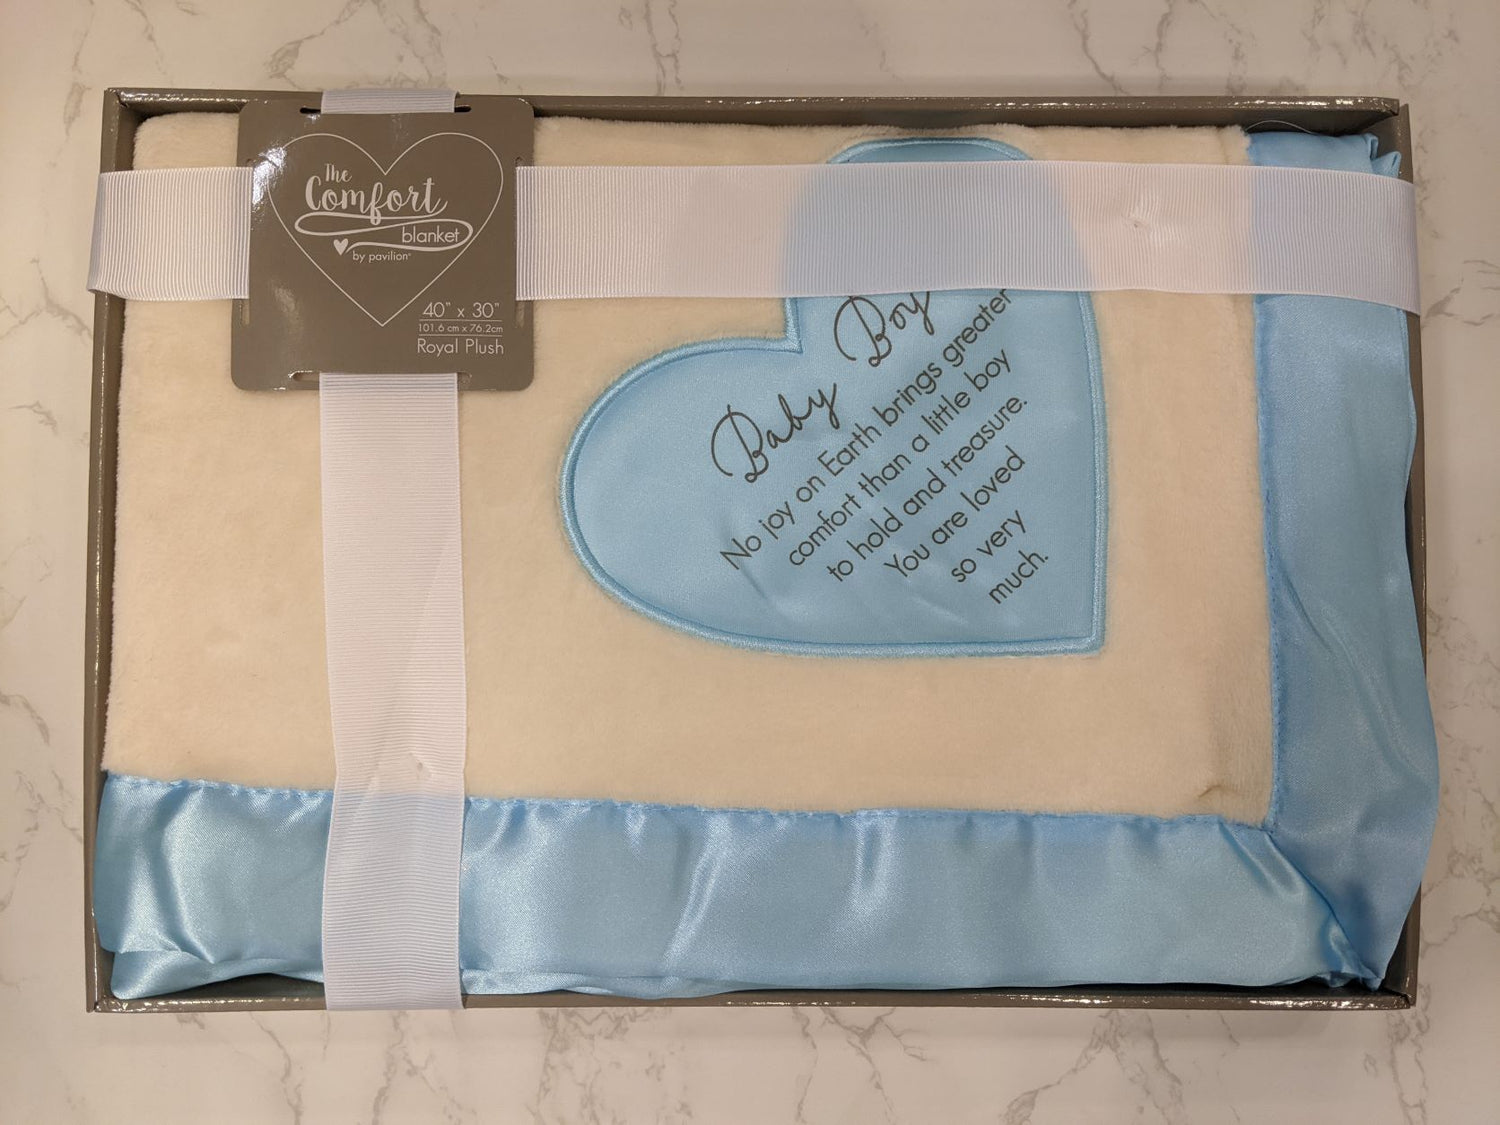 30" x 40" Royal plush blanket, packaged in a ribbon-wrapped open-faced box,  features silk heart detail and edging.  This text is printed onto embroidered heart the "Baby Boy; No Joy On Earth Brings Greater Comfort Than A Little Boy To Hold And Treasure. You Are Loved So Very Much."  A perfect gift for the newest member of the family!